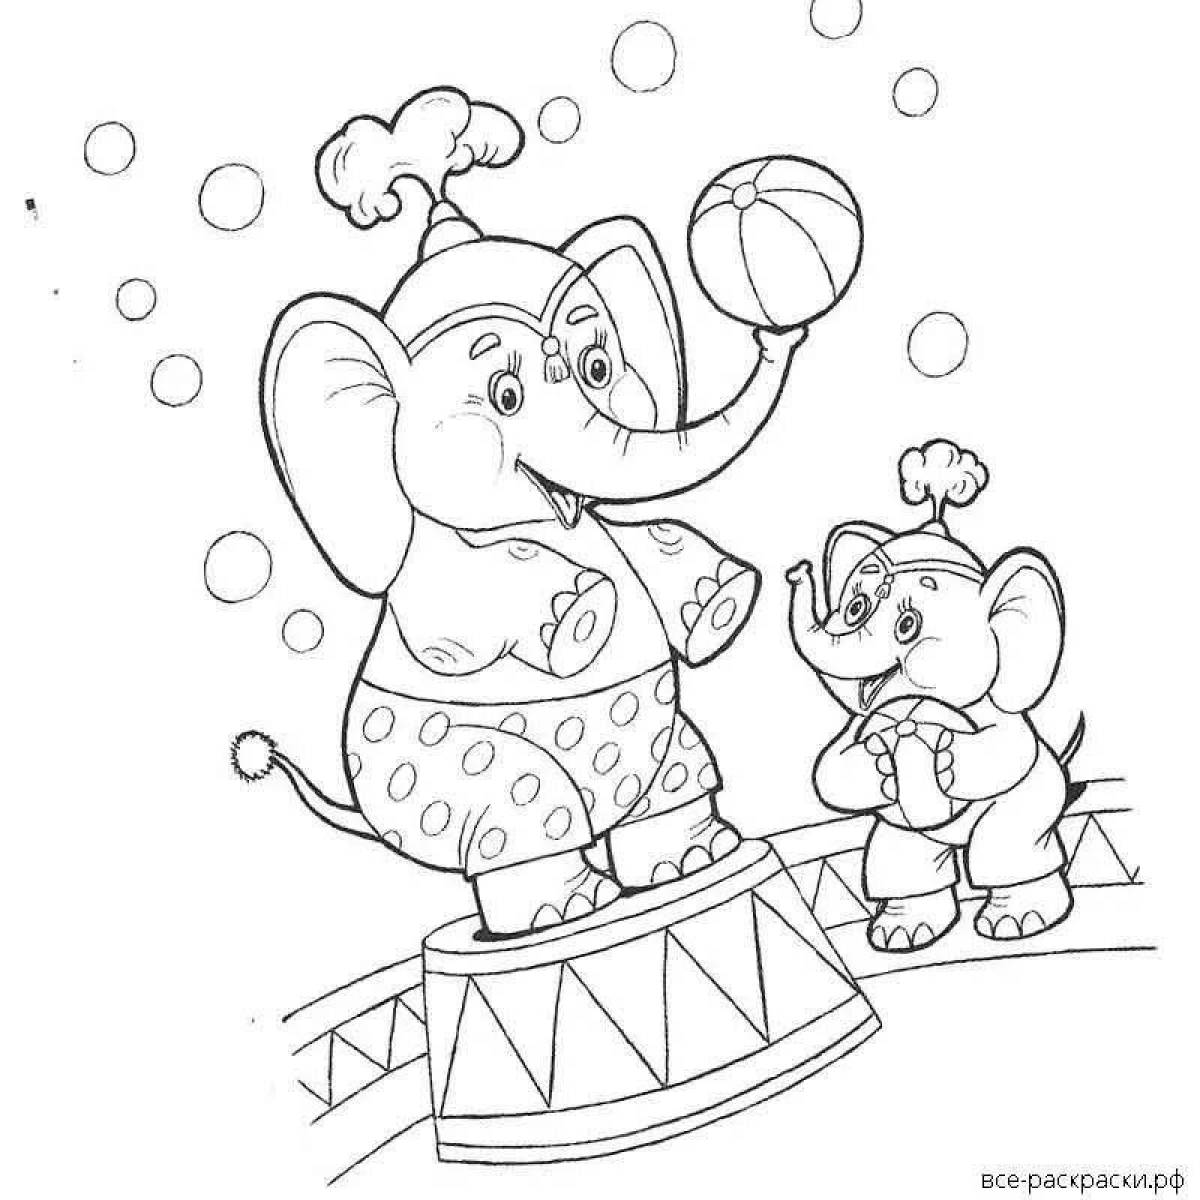 Colorful circus coloring book for kids 6-7 years old